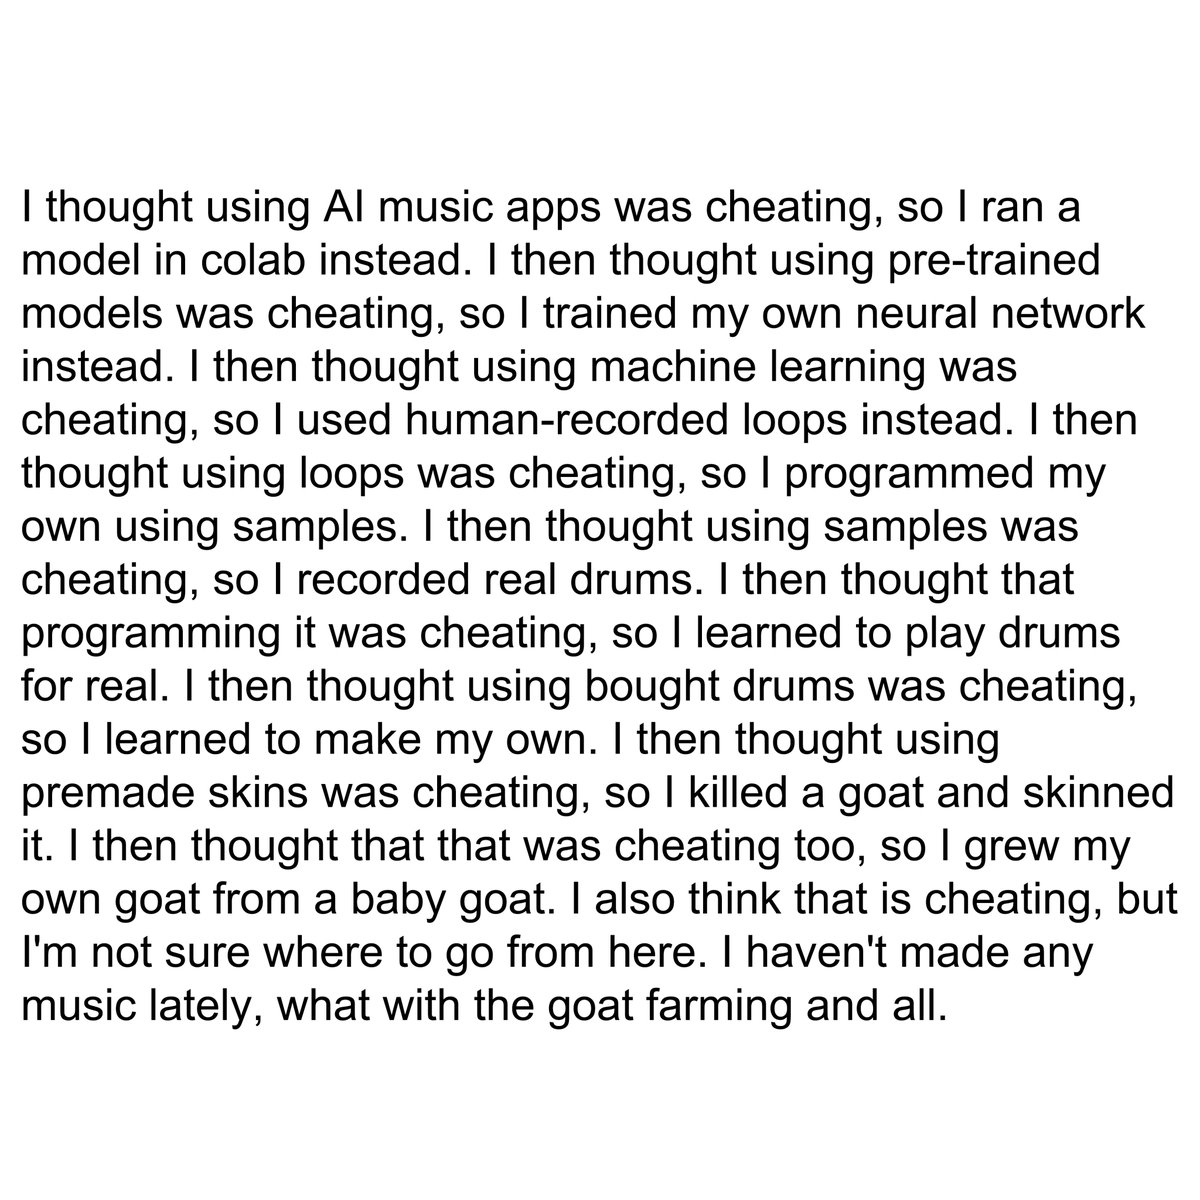 updated the classic music production meme 'I thought that using loops was cheating'